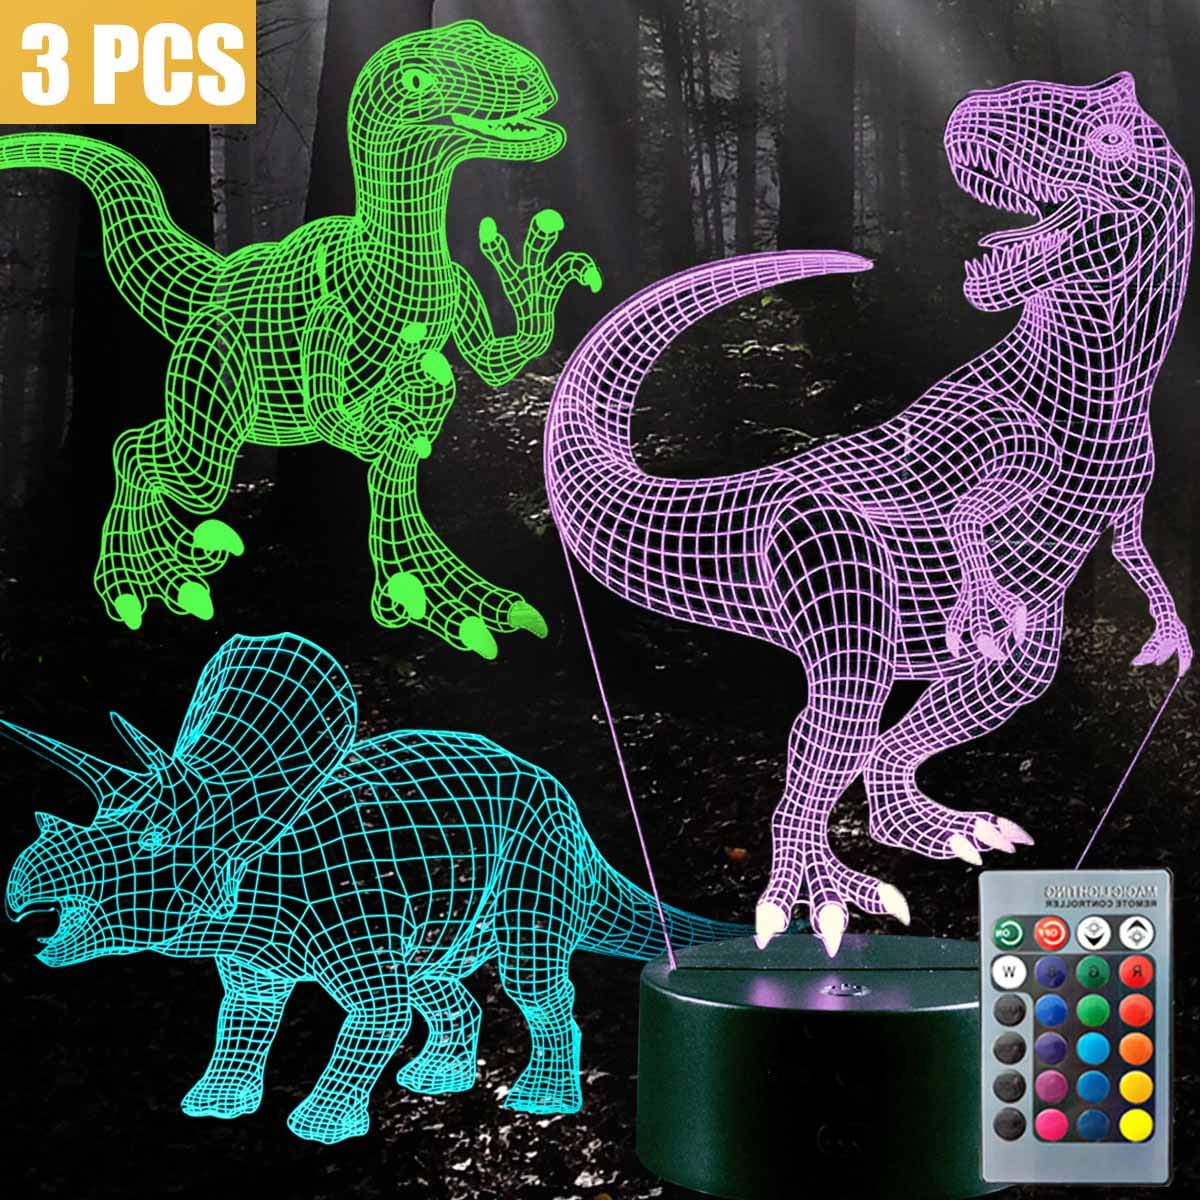 Dinosaur-wan Year Old 3D Dinosaur Lamp 7 Colors with Remote & Smart Touch Night Light T Rex Toys Gifts Boys Age 2 3 4 5 6 7 8 BEISHIDA Dinosaur Toys 